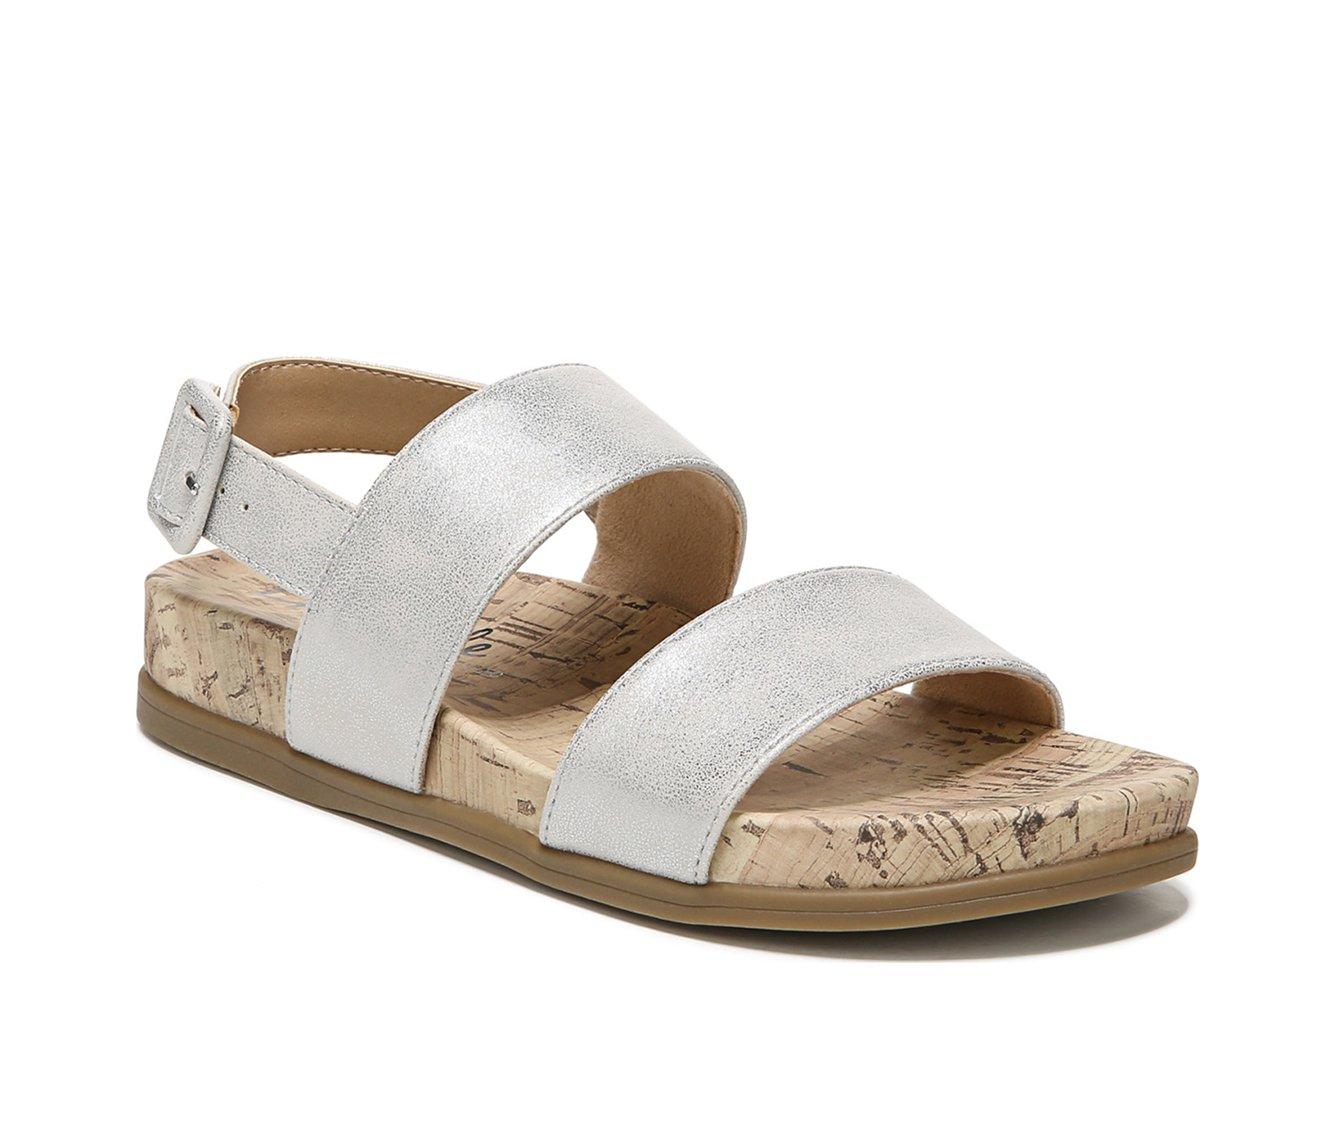 Women's LifeStride Holiday Footbed Sandals